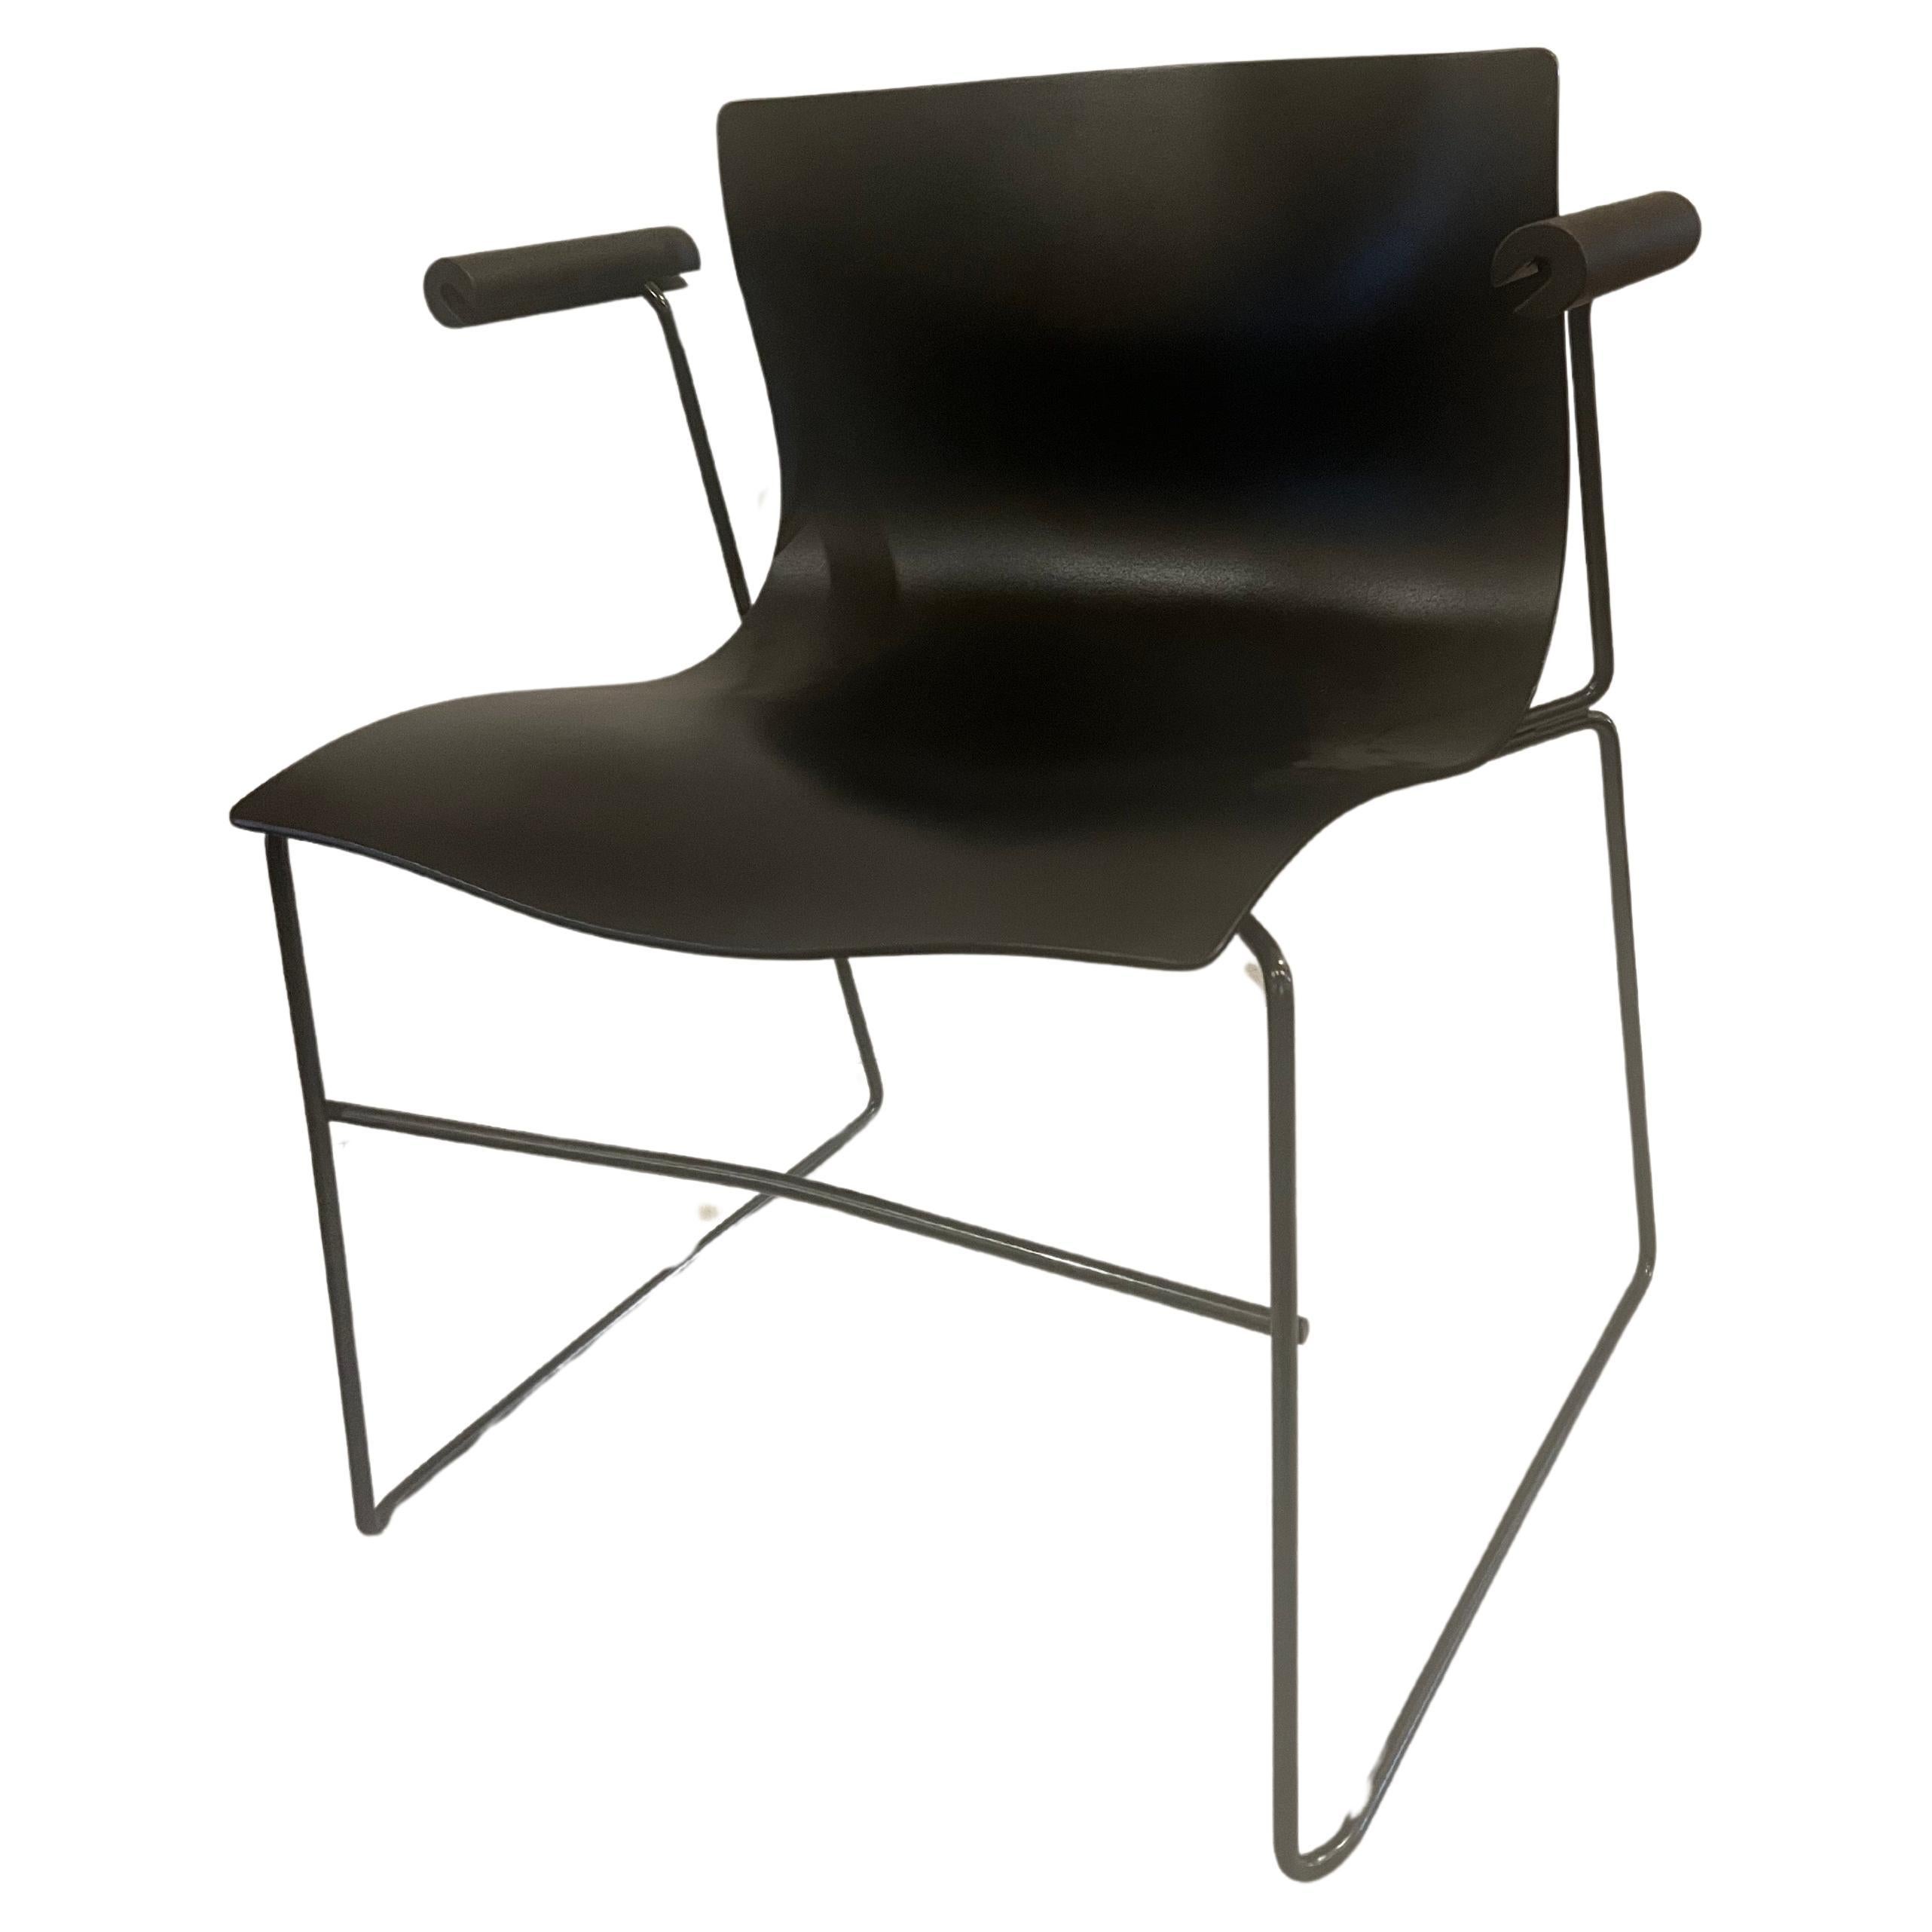 A great pair of armchairs designed by Massimo Vignelli for Knoll, circa 1983, for Knoll studio in great condition, black on black the seats are very clean these chairs are nice and comfy. These chairs are stackable for storing or moving. Stamped and